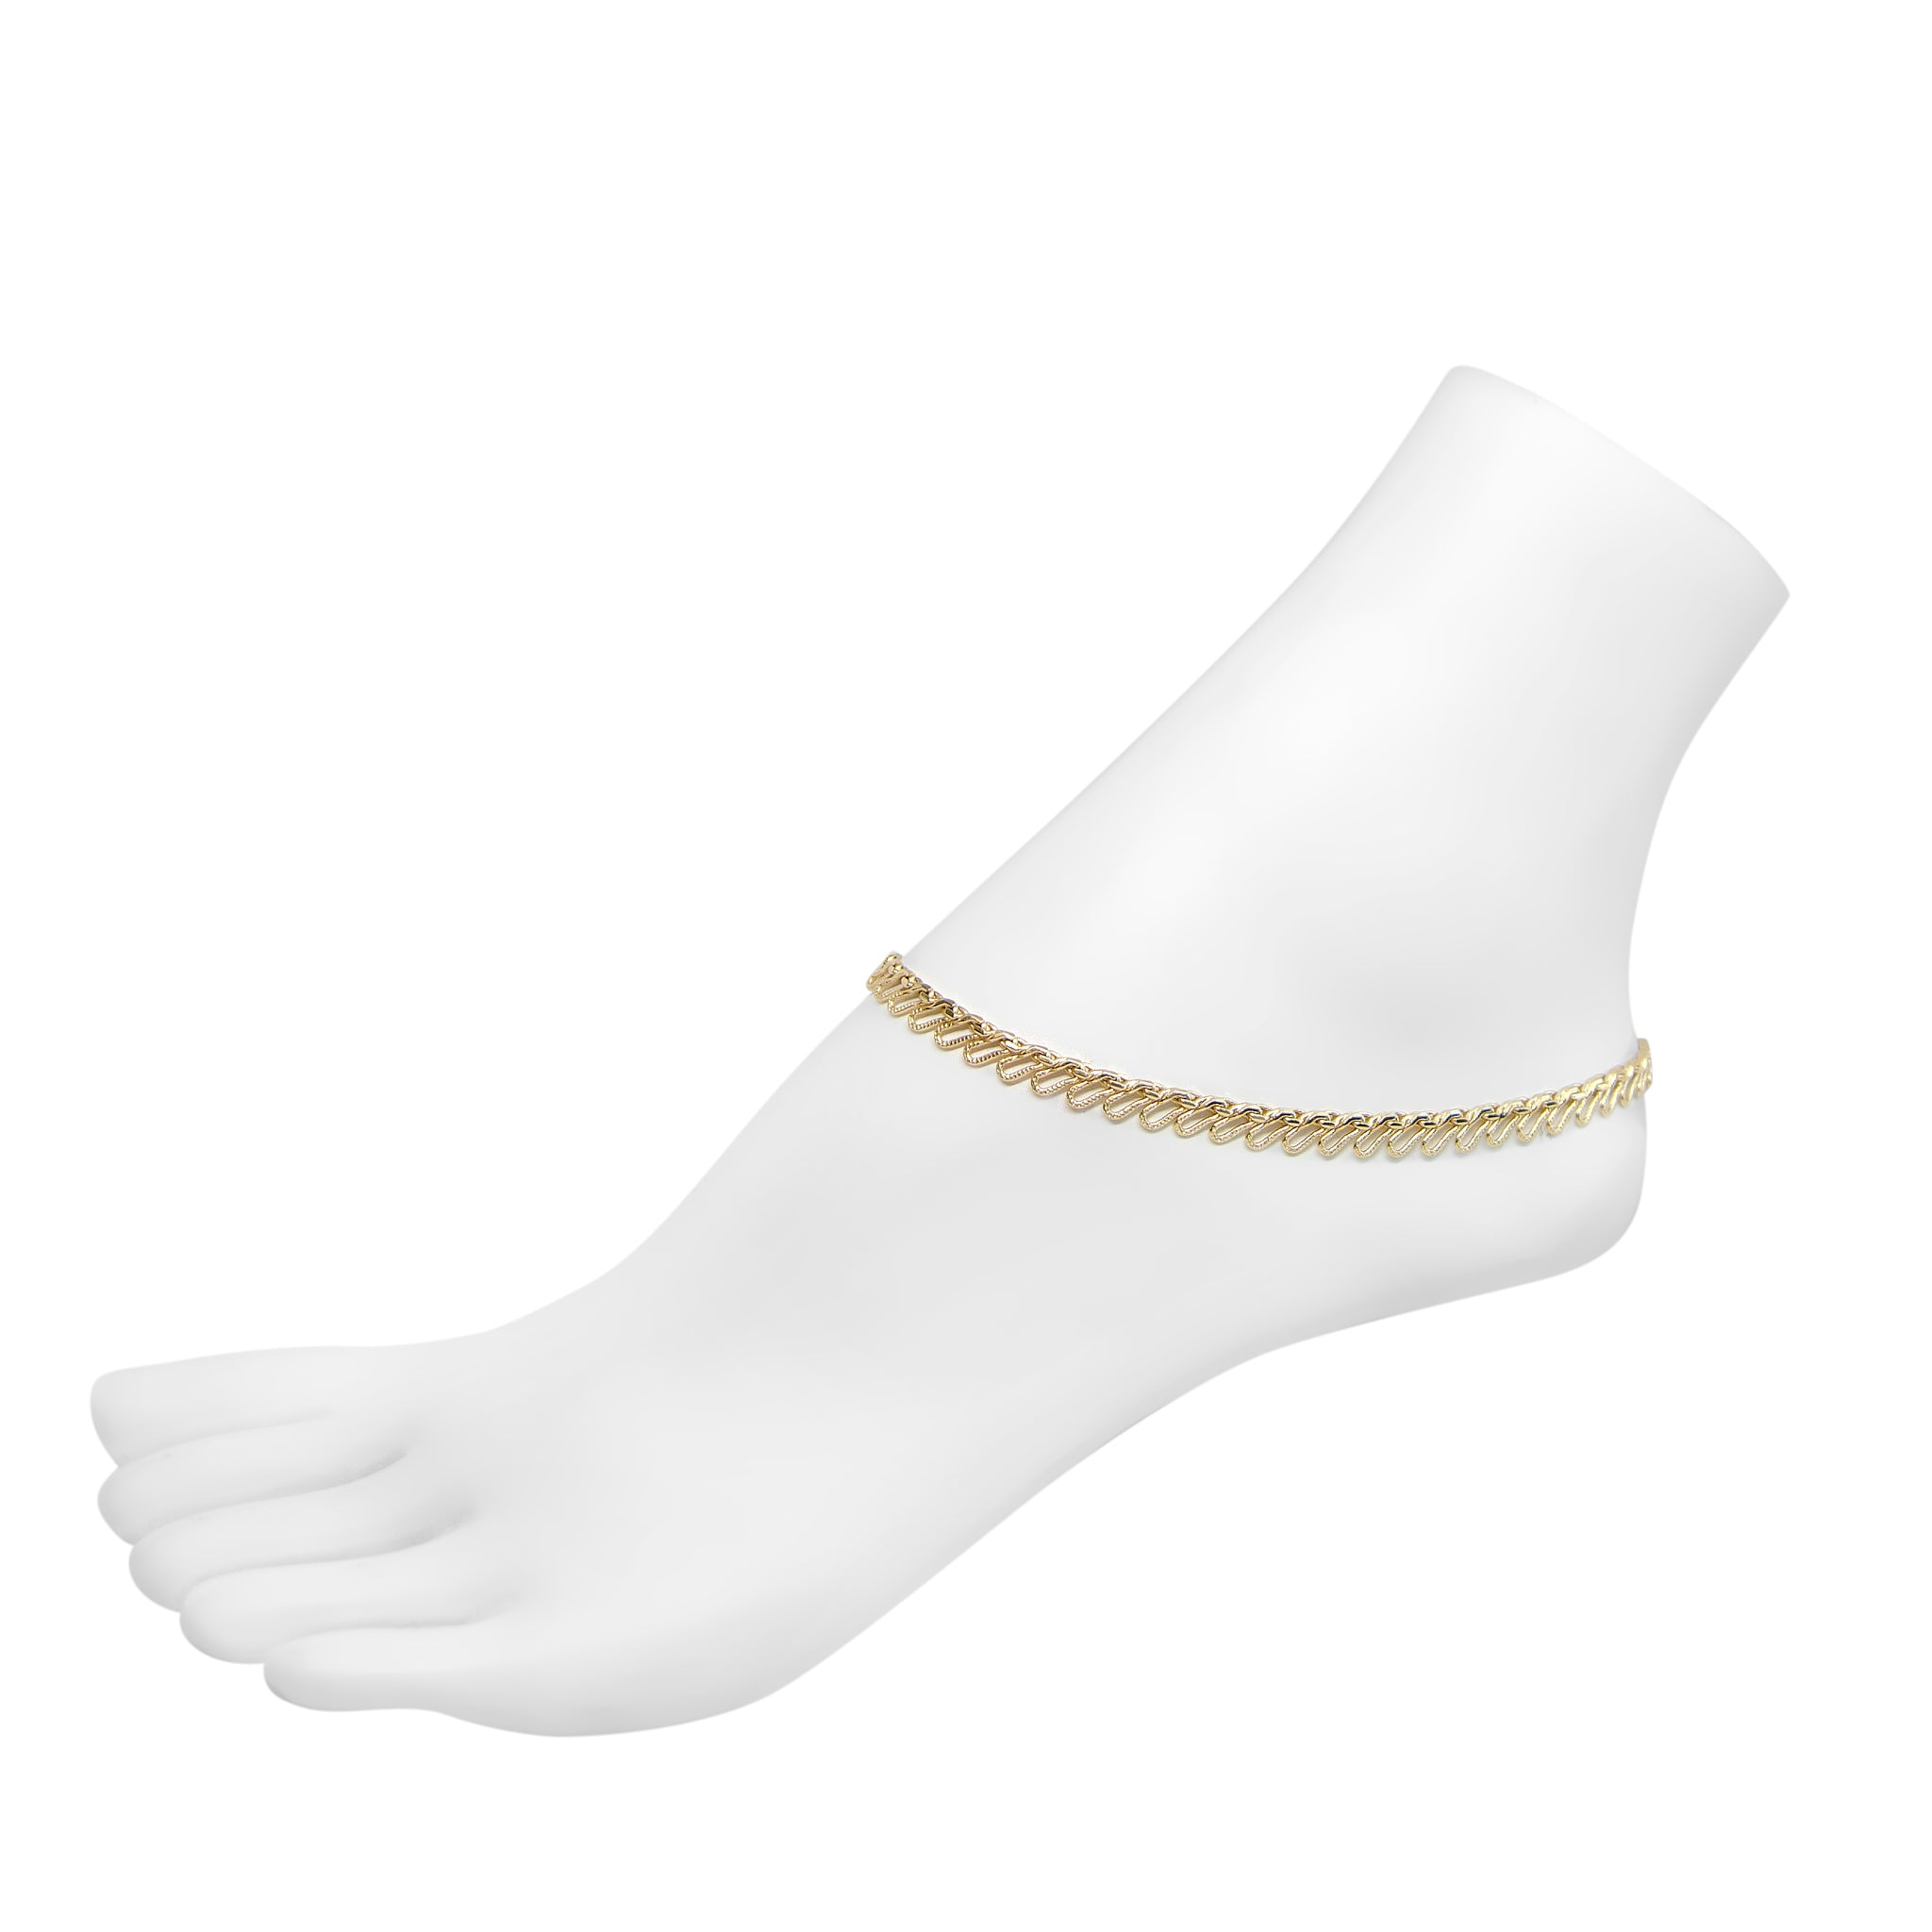 Silver Anklets Designs starting @ Rs. 495 -Shaya by CaratLane